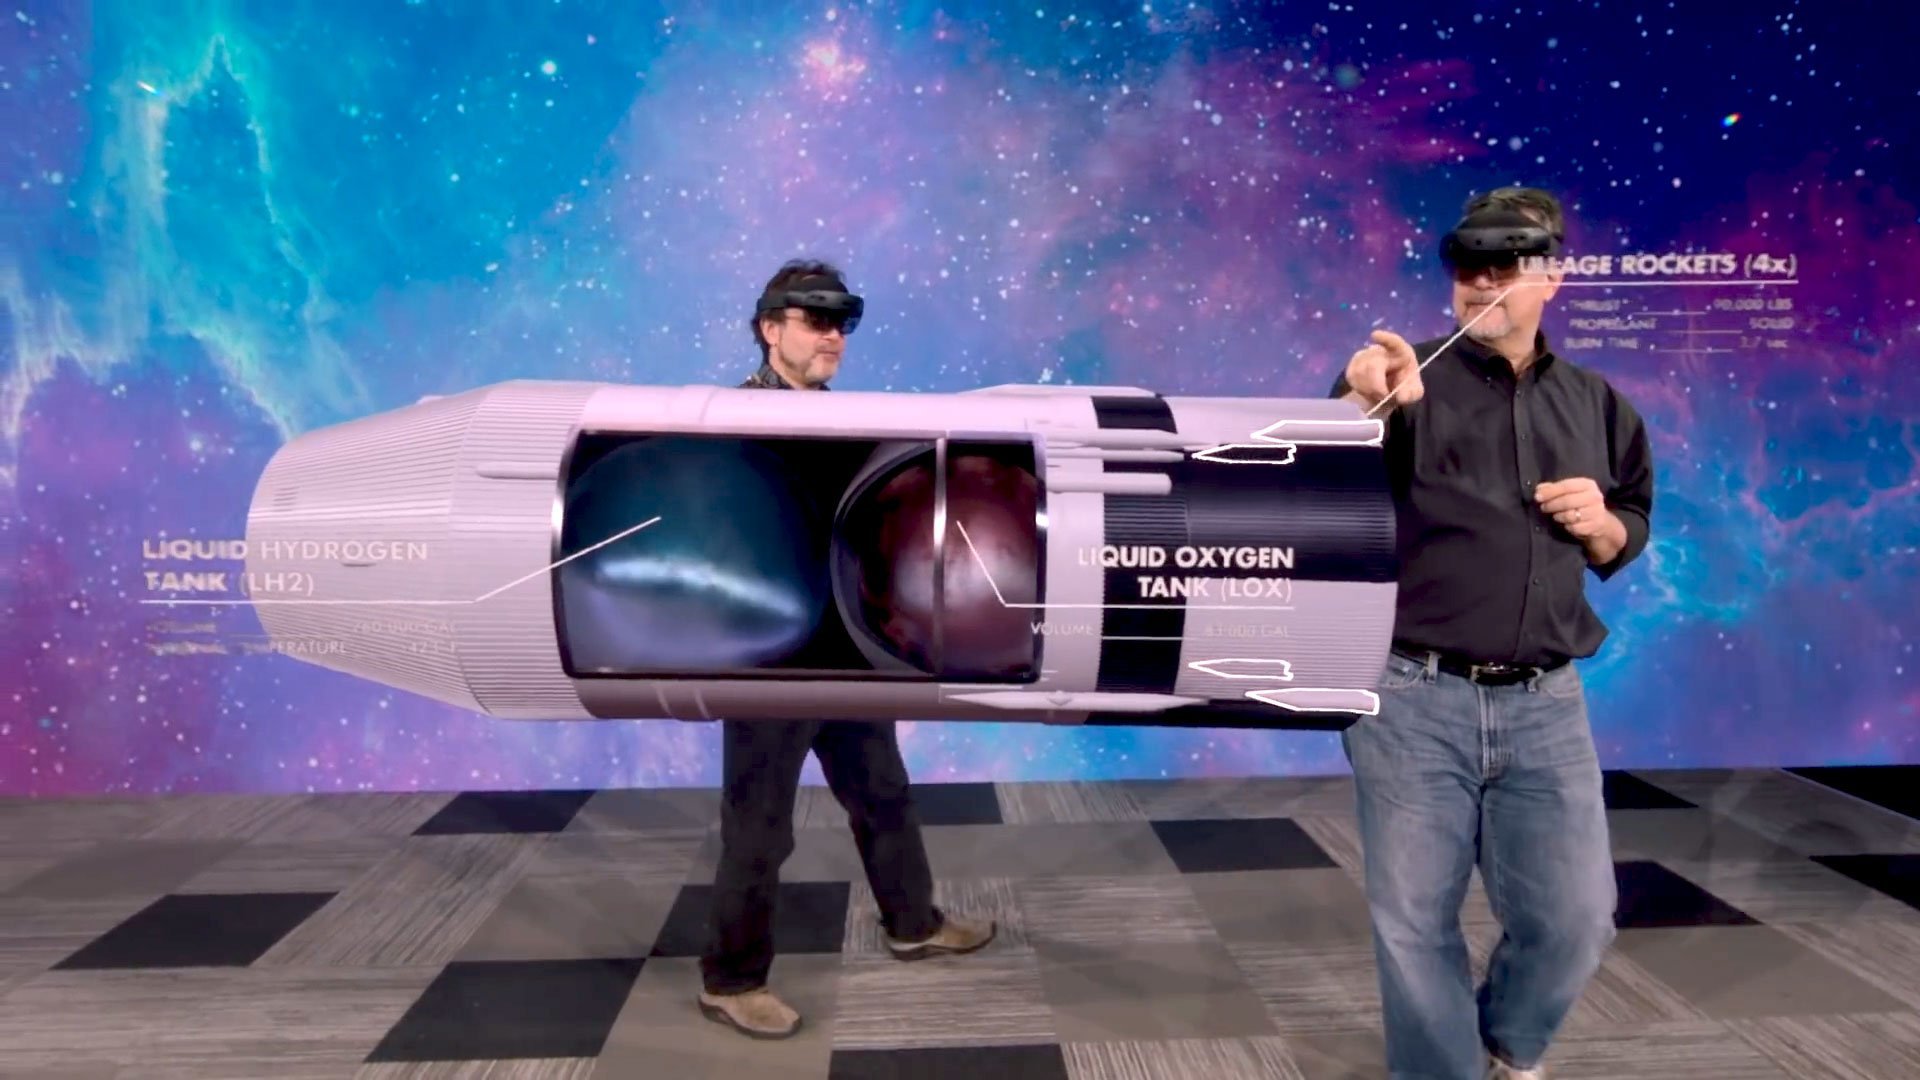 Microsoft has released a demo video of HoloLens 2